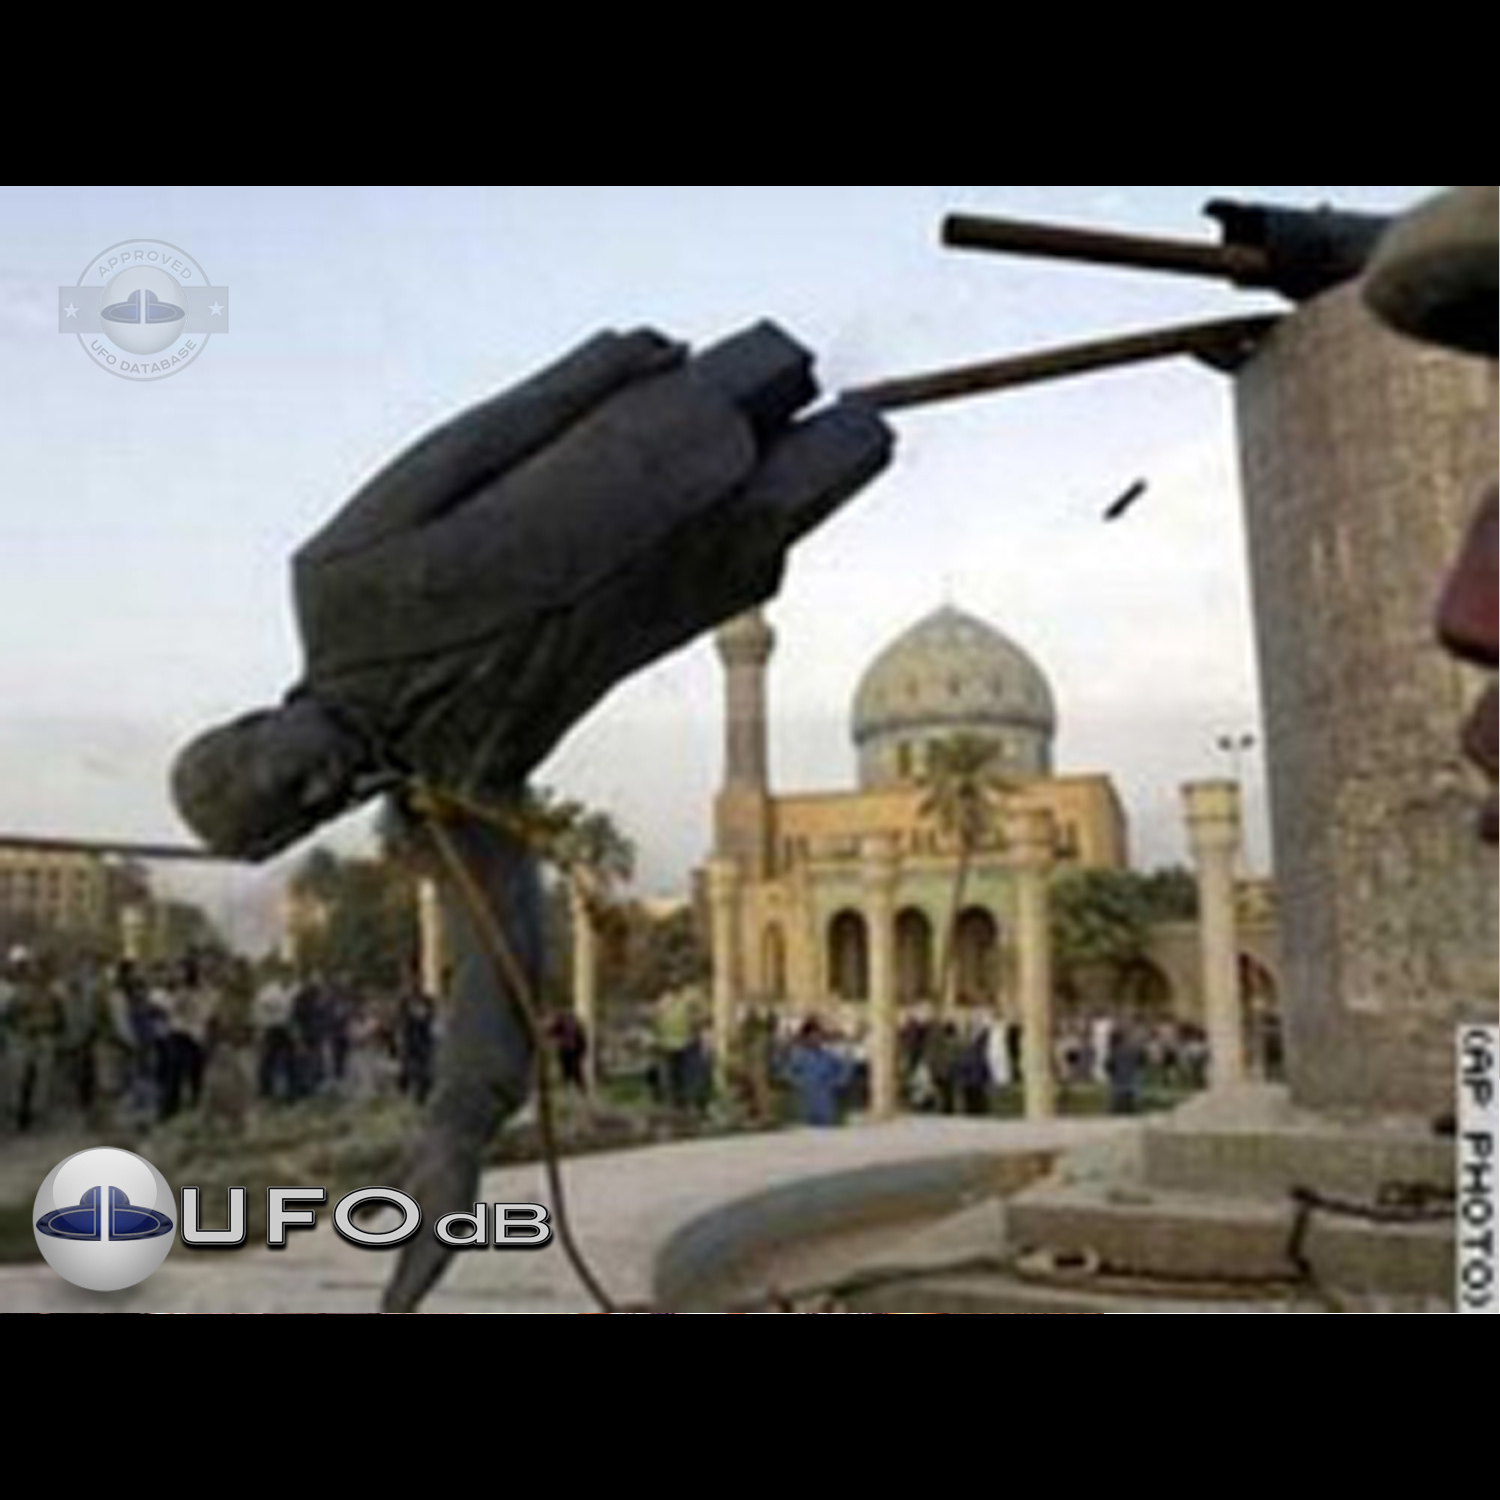 UFO Picture taken while Saddam Hussein statue is falling | Baghdad UFO Picture #183-1